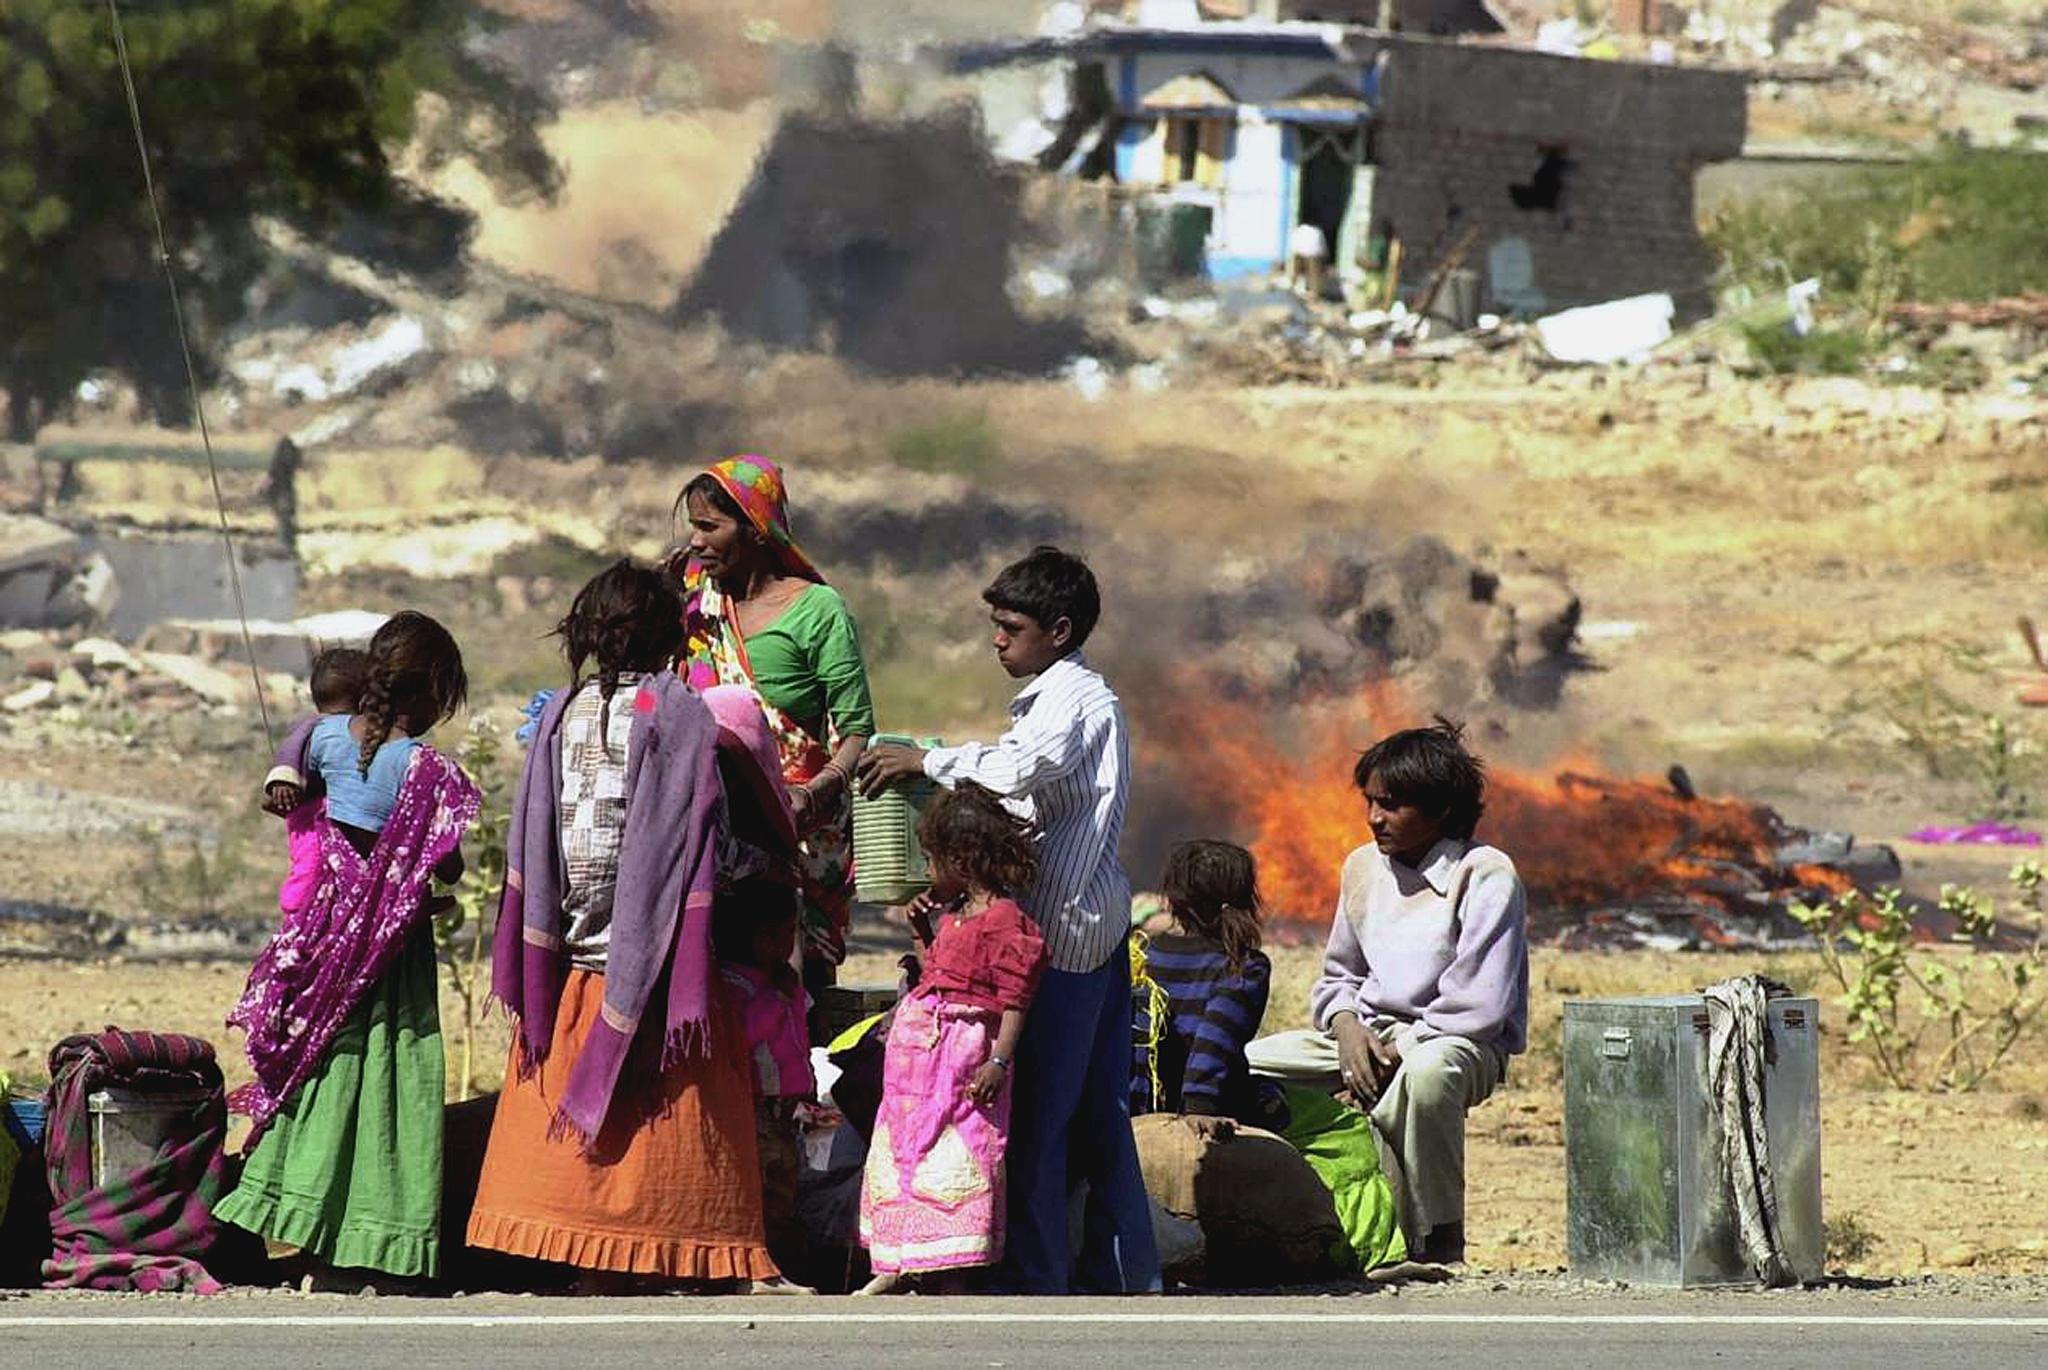 A homeless family waits for a vehicle on Jan. 27, 2001 against a backdrop of ruined houses and a funeral pyre, in the village of Boundi in Bhuj district in Gujarat. (Arko Datta—AFP/Getty Images)